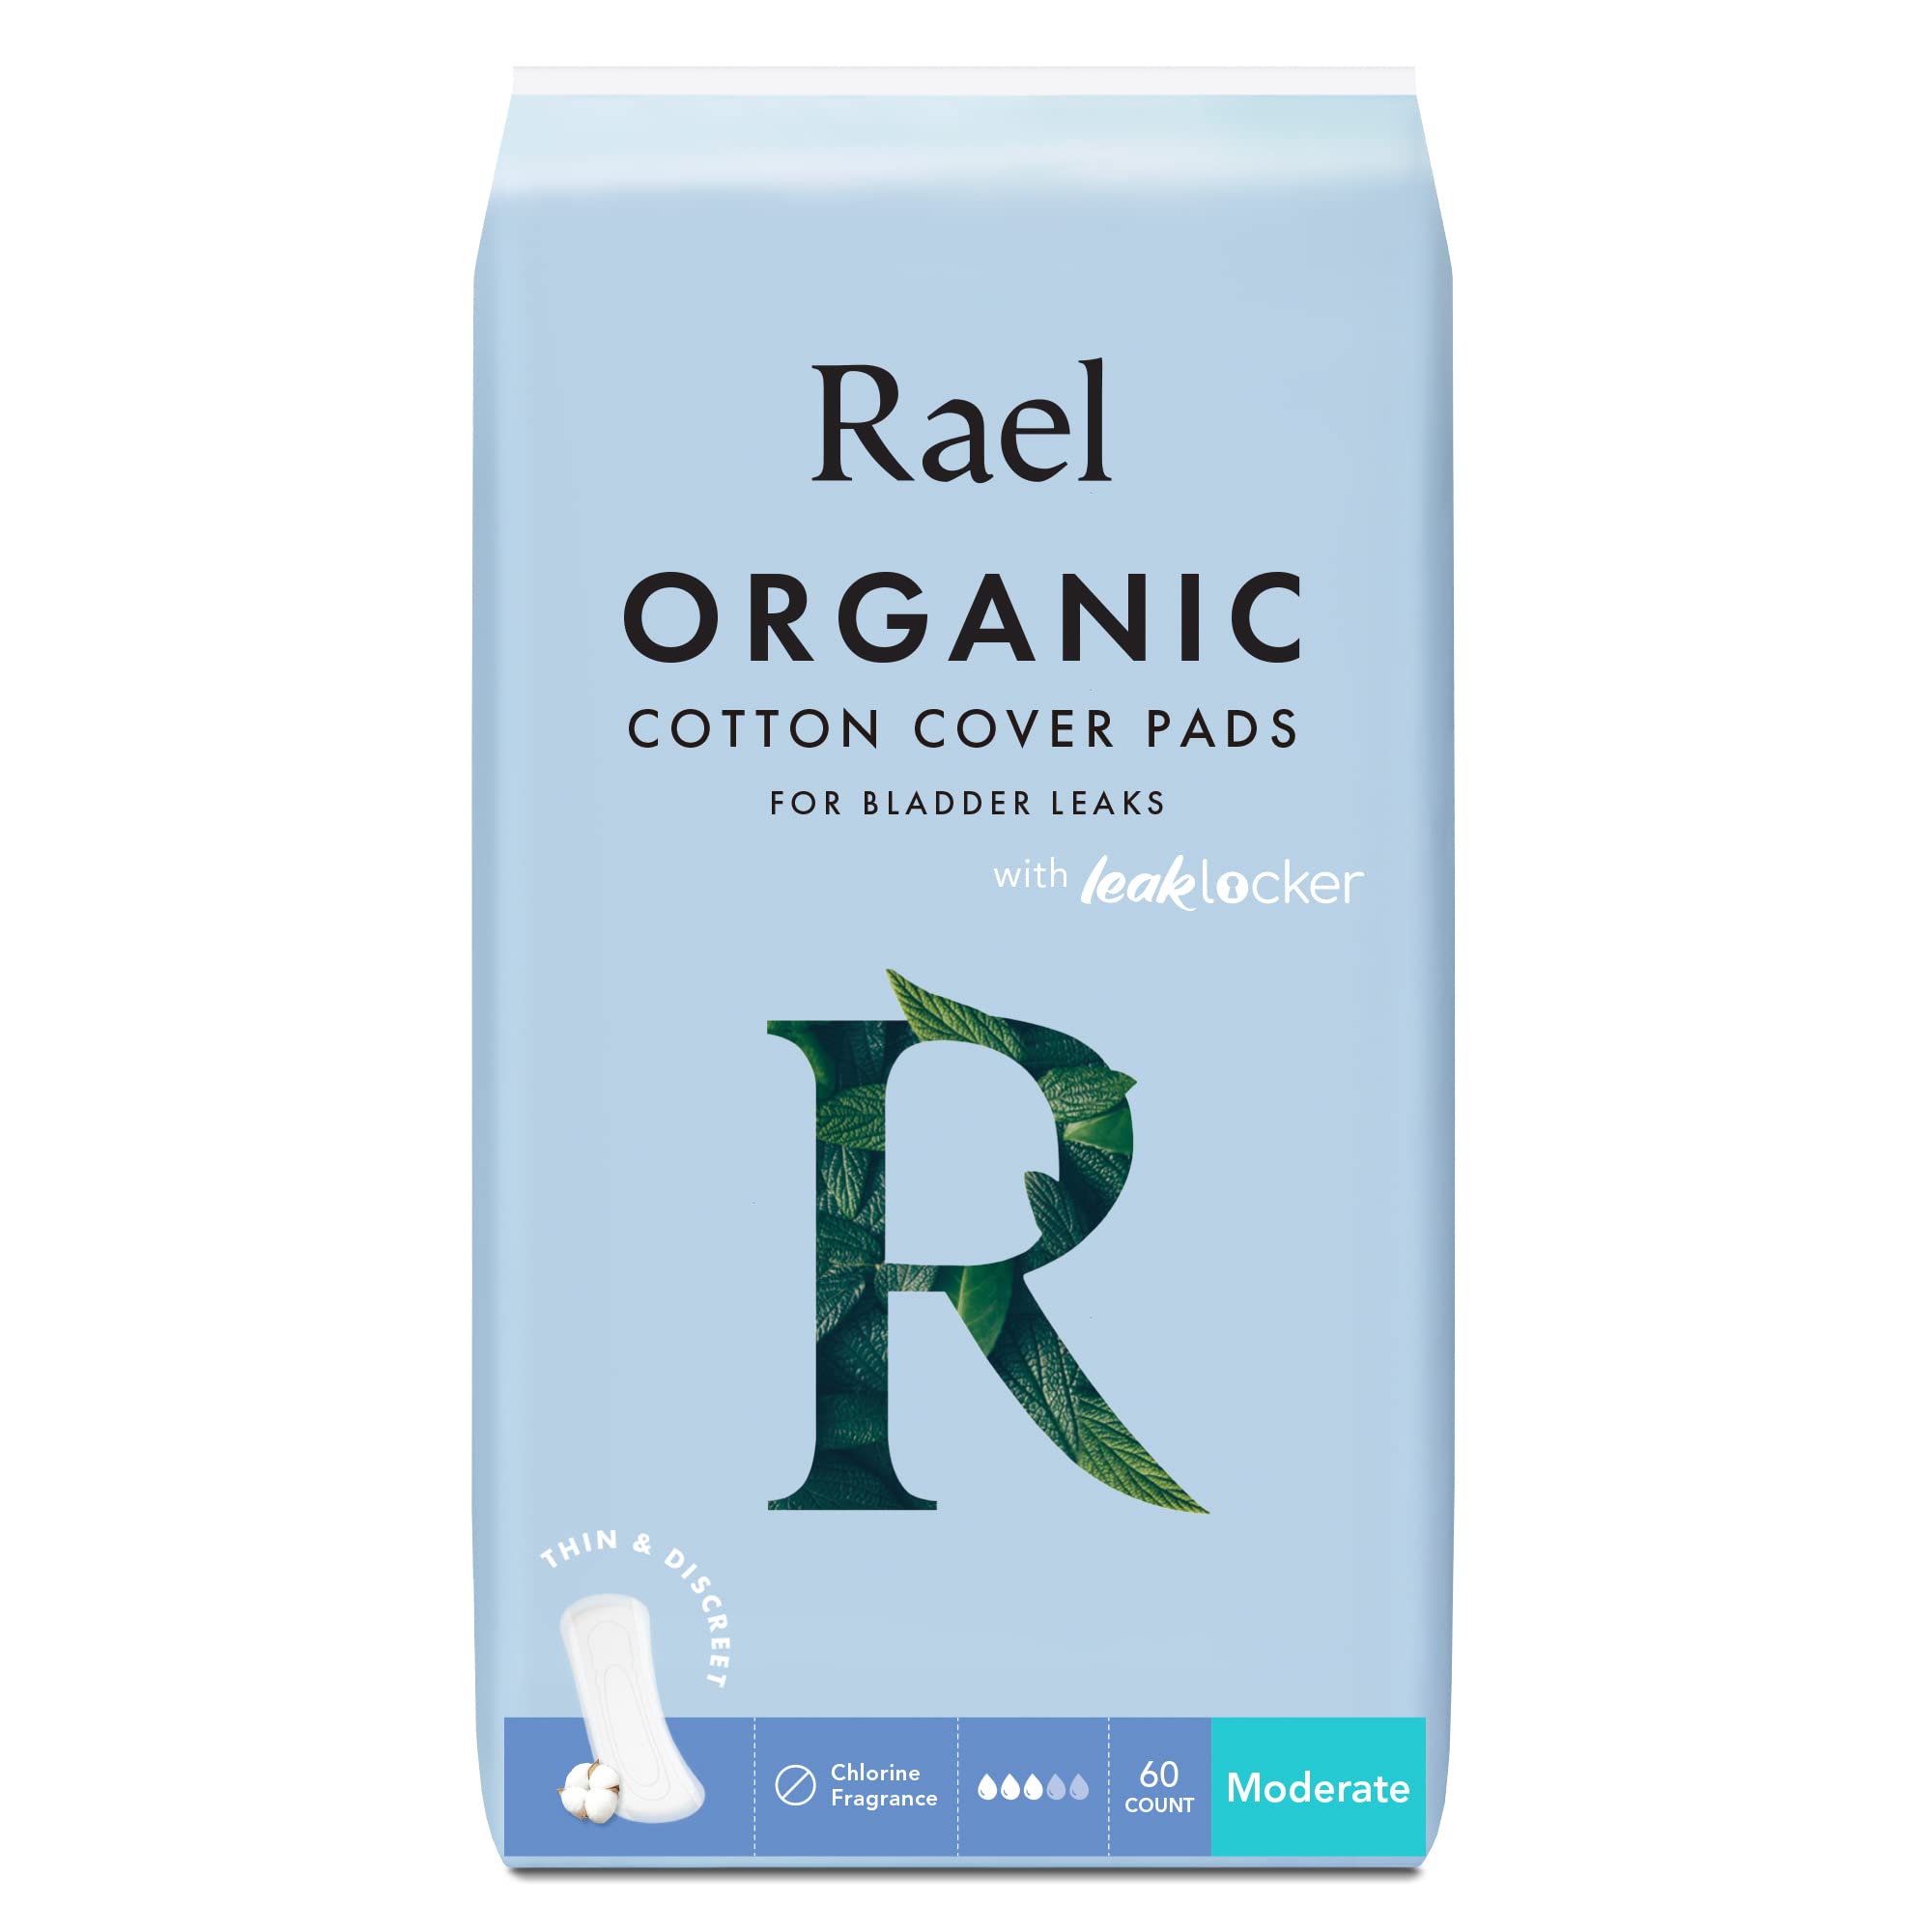 Rael Organic Cotton Cover Incontinence Pads - Moderate Absorbency